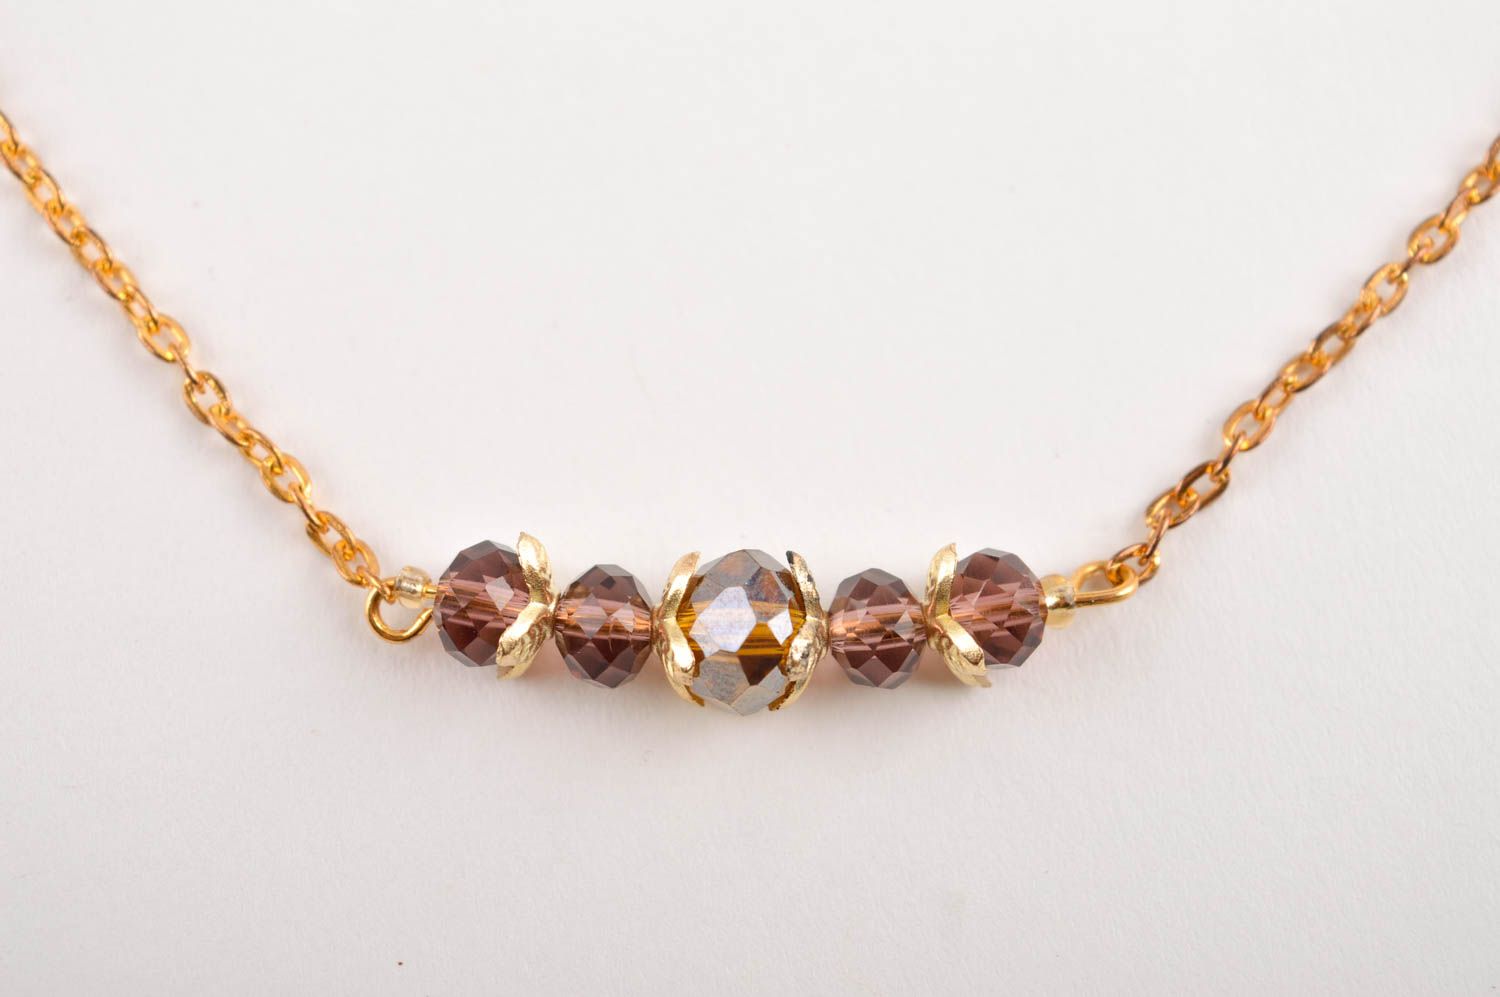 Handmade necklace of gold color beaded necklace fashion jewelry crystal jewelry photo 2